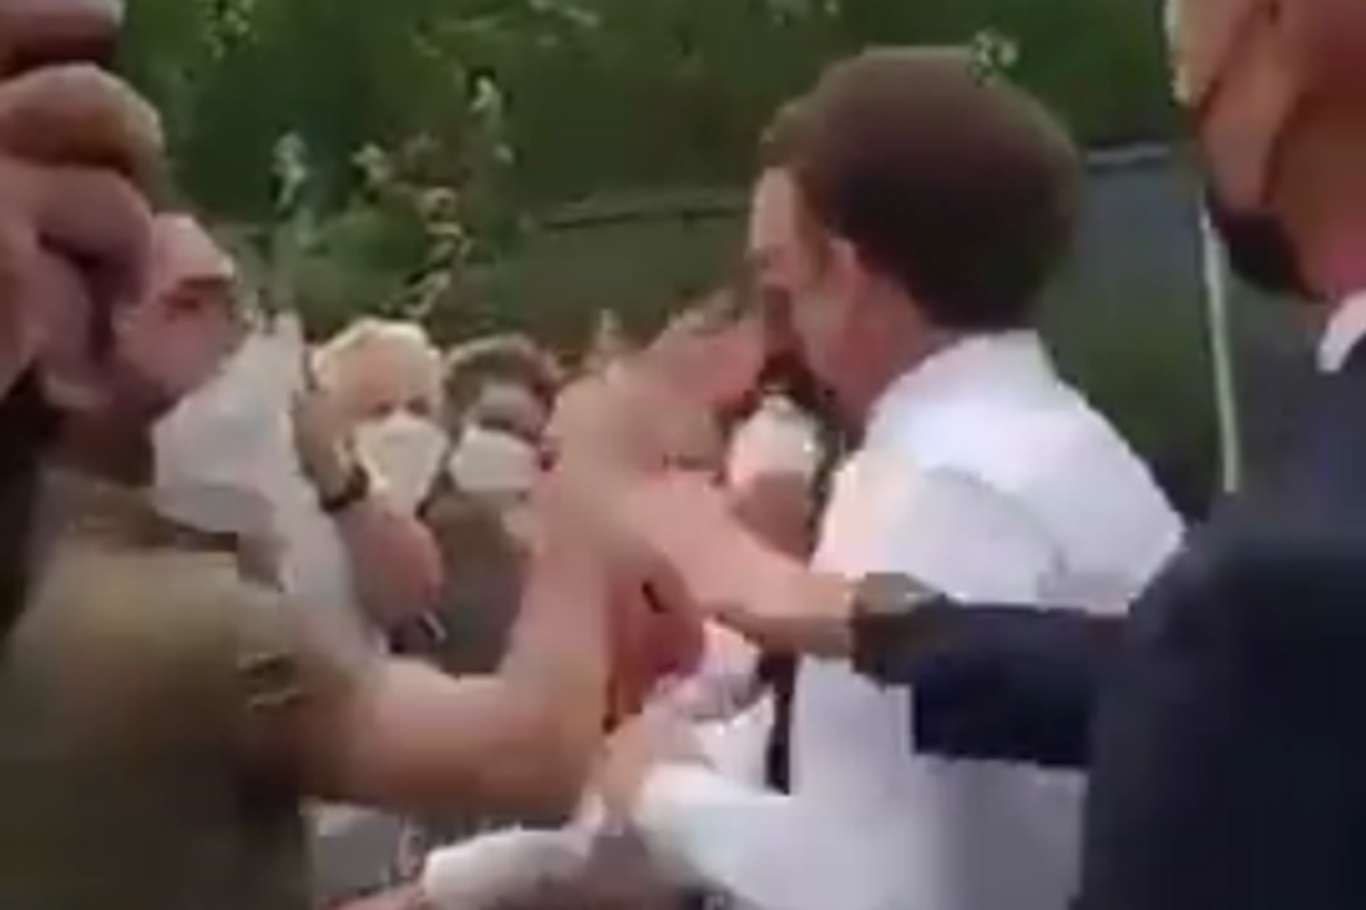 French President Macron slapped by man during visit to southeastern France